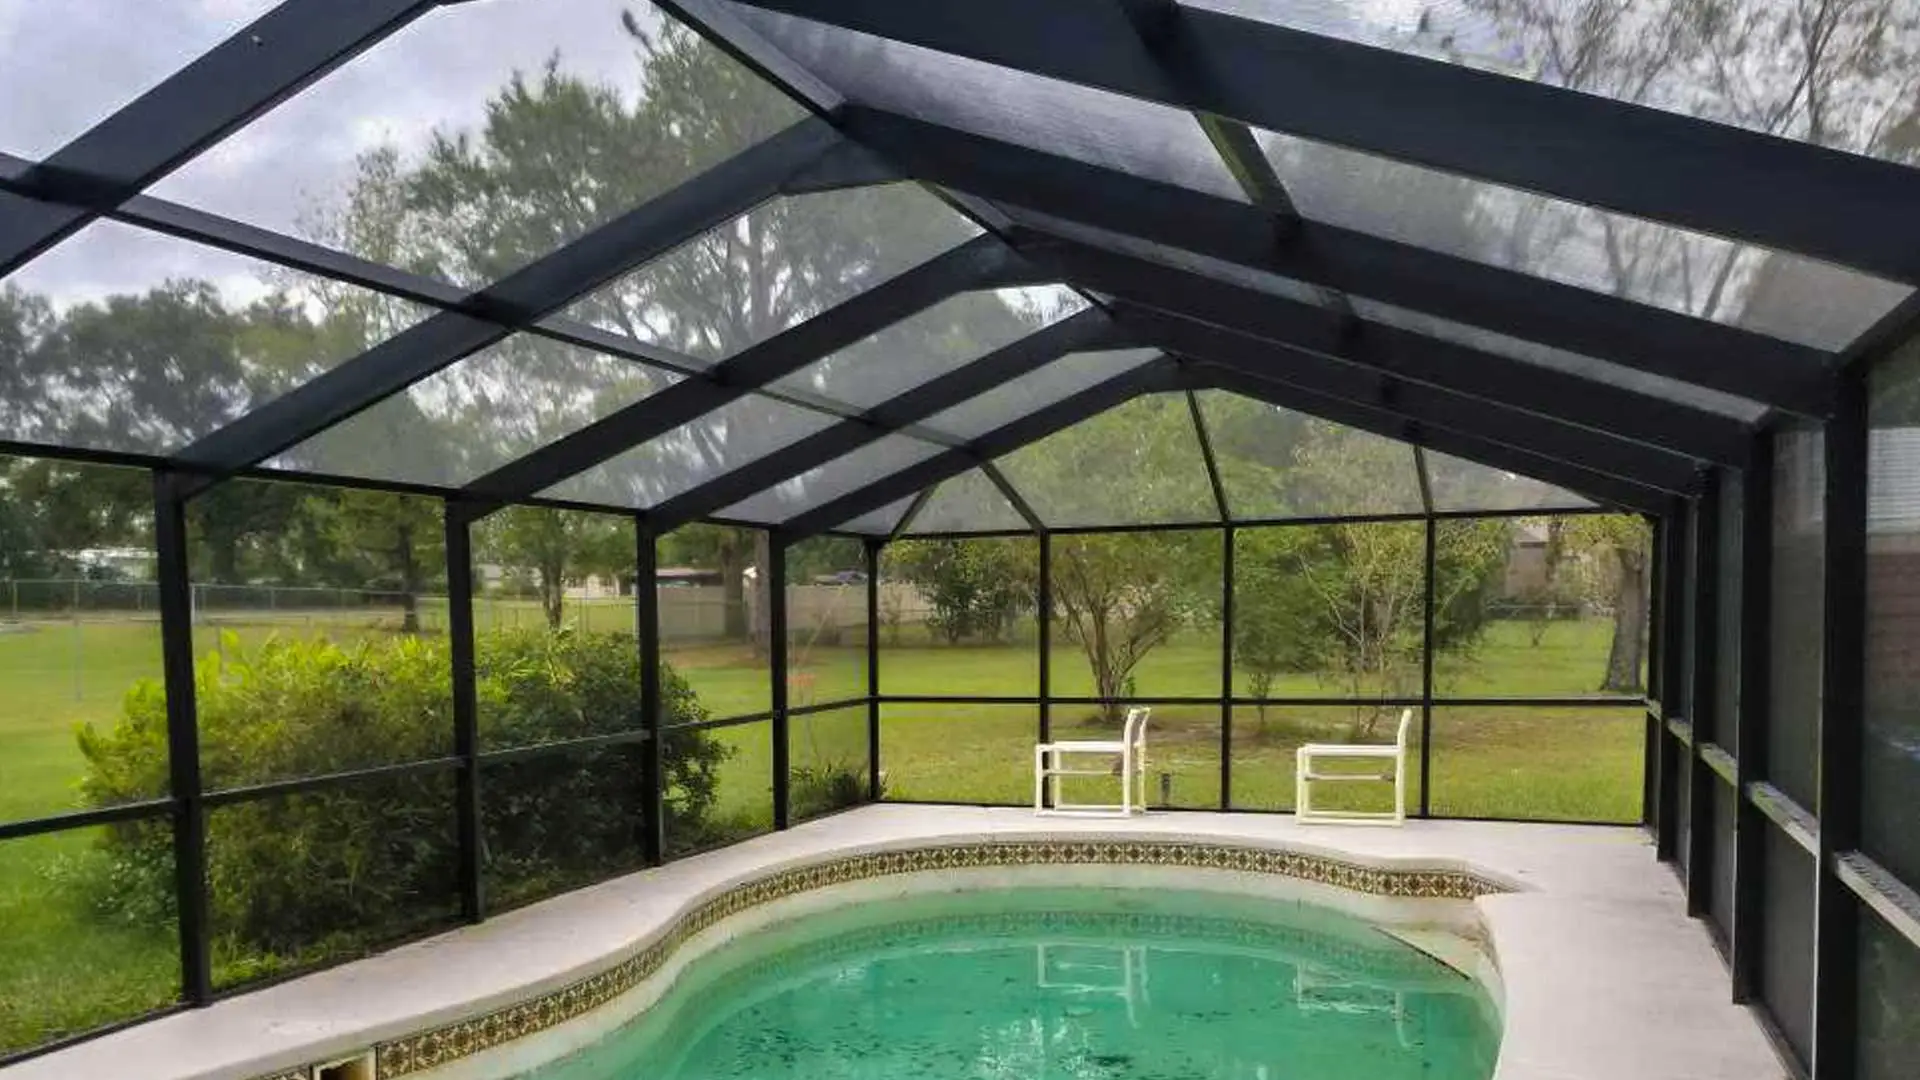 After our client's pool cage collapsed, we built a new aluminum pool cage at their home in Lakeland.